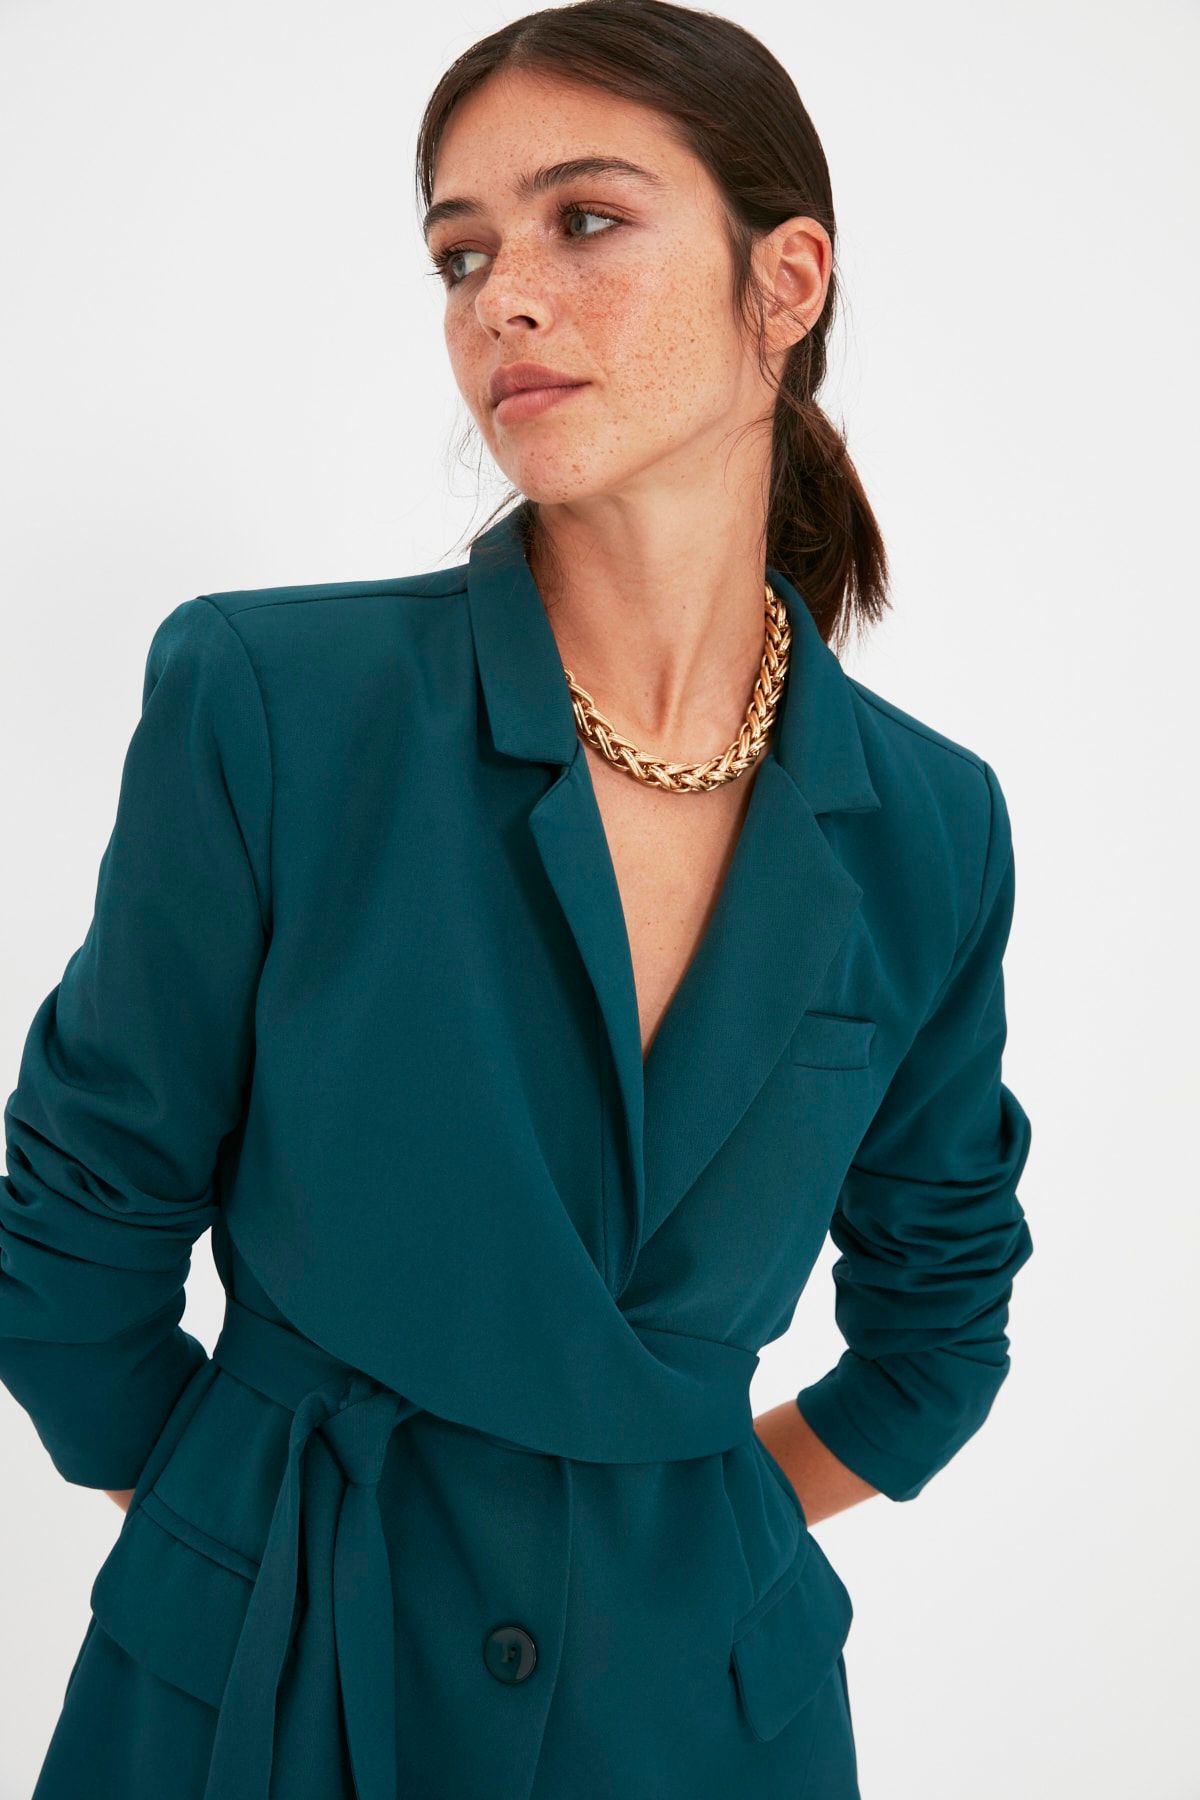 Trendyol Collection Blazer - Green - Blazers  Blazer pattern, Casual  school outfits, Casual work outfit